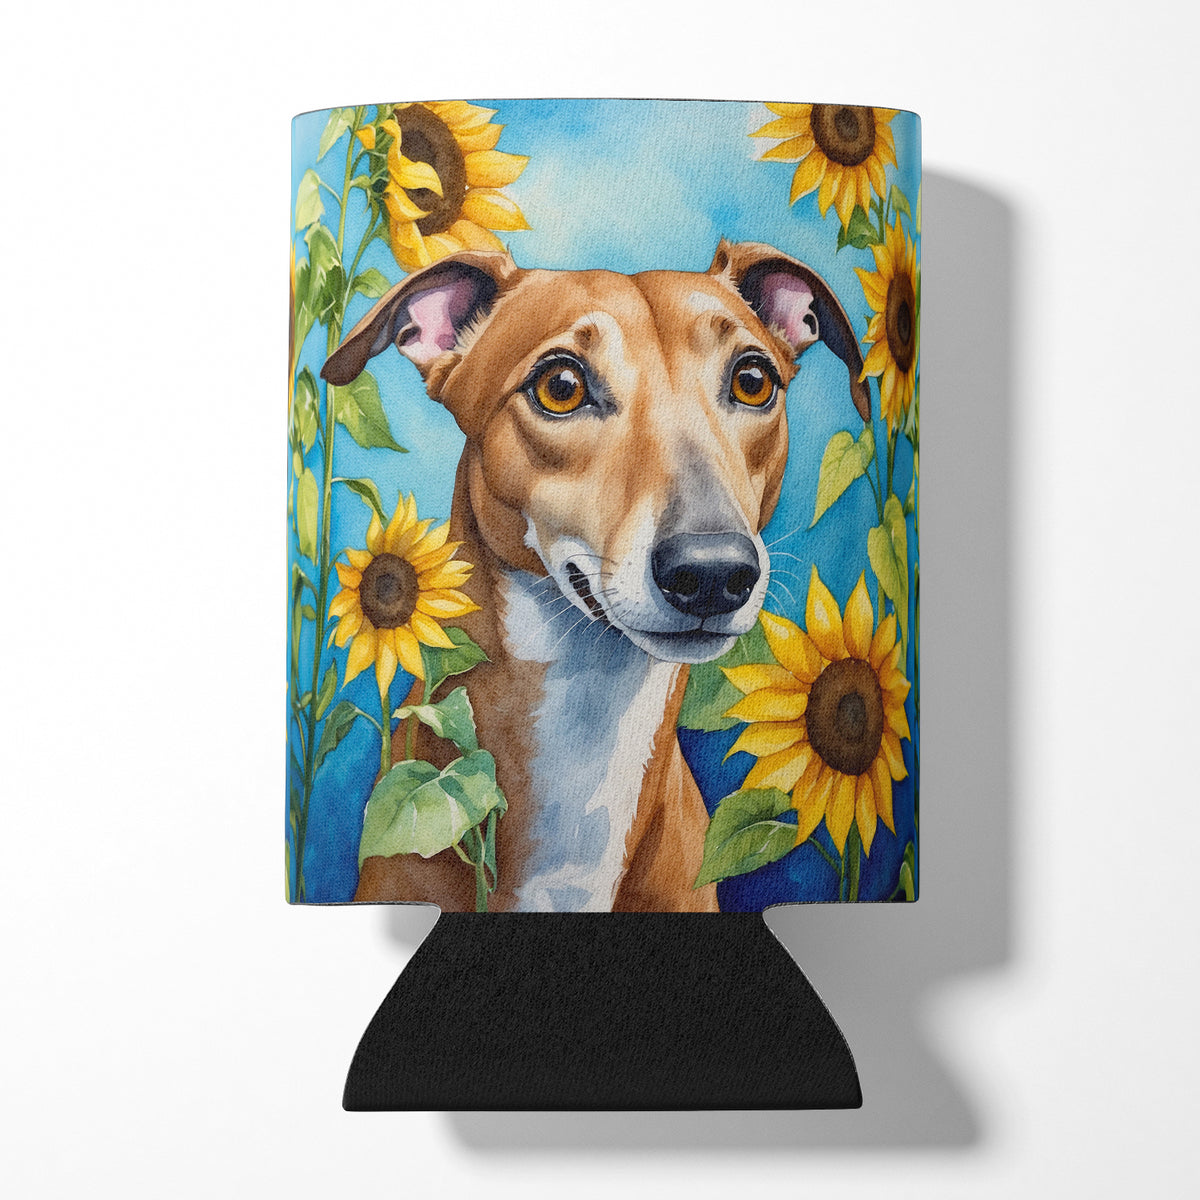 Buy this Greyhound in Sunflowers Can or Bottle Hugger